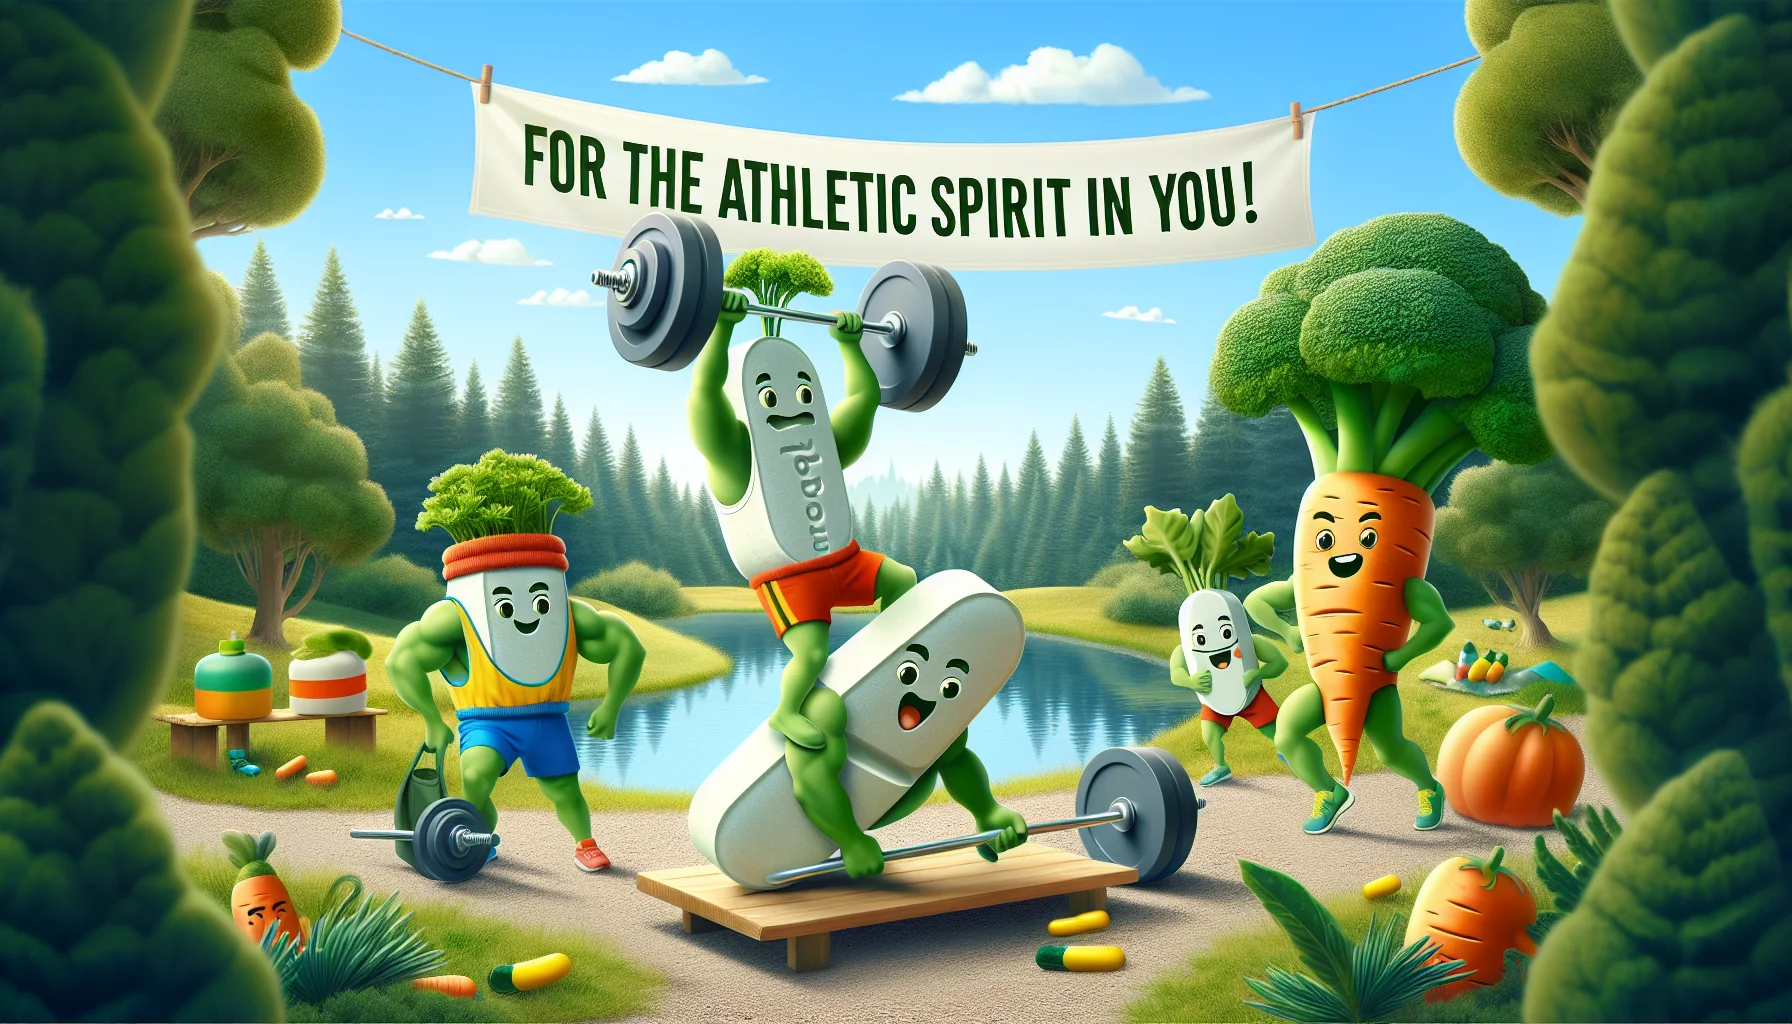 Design an image that shows a comical situation of nature-inspired supplements. For example, depict a fun instance where magnesium glycinate tablets shaped like small rocks are being 'lifted' by lively, cartoonish vegetables dressed in workout attire. They're in a beautiful natural setting, with trees, a stream and a clear sky. Draw attention to the message that these are beneficial for sports and fitness regimes. Have a huge banner in the sky with the words 'For the Athletic Spirit in You!'. Ensure the scene is inviting and playful.